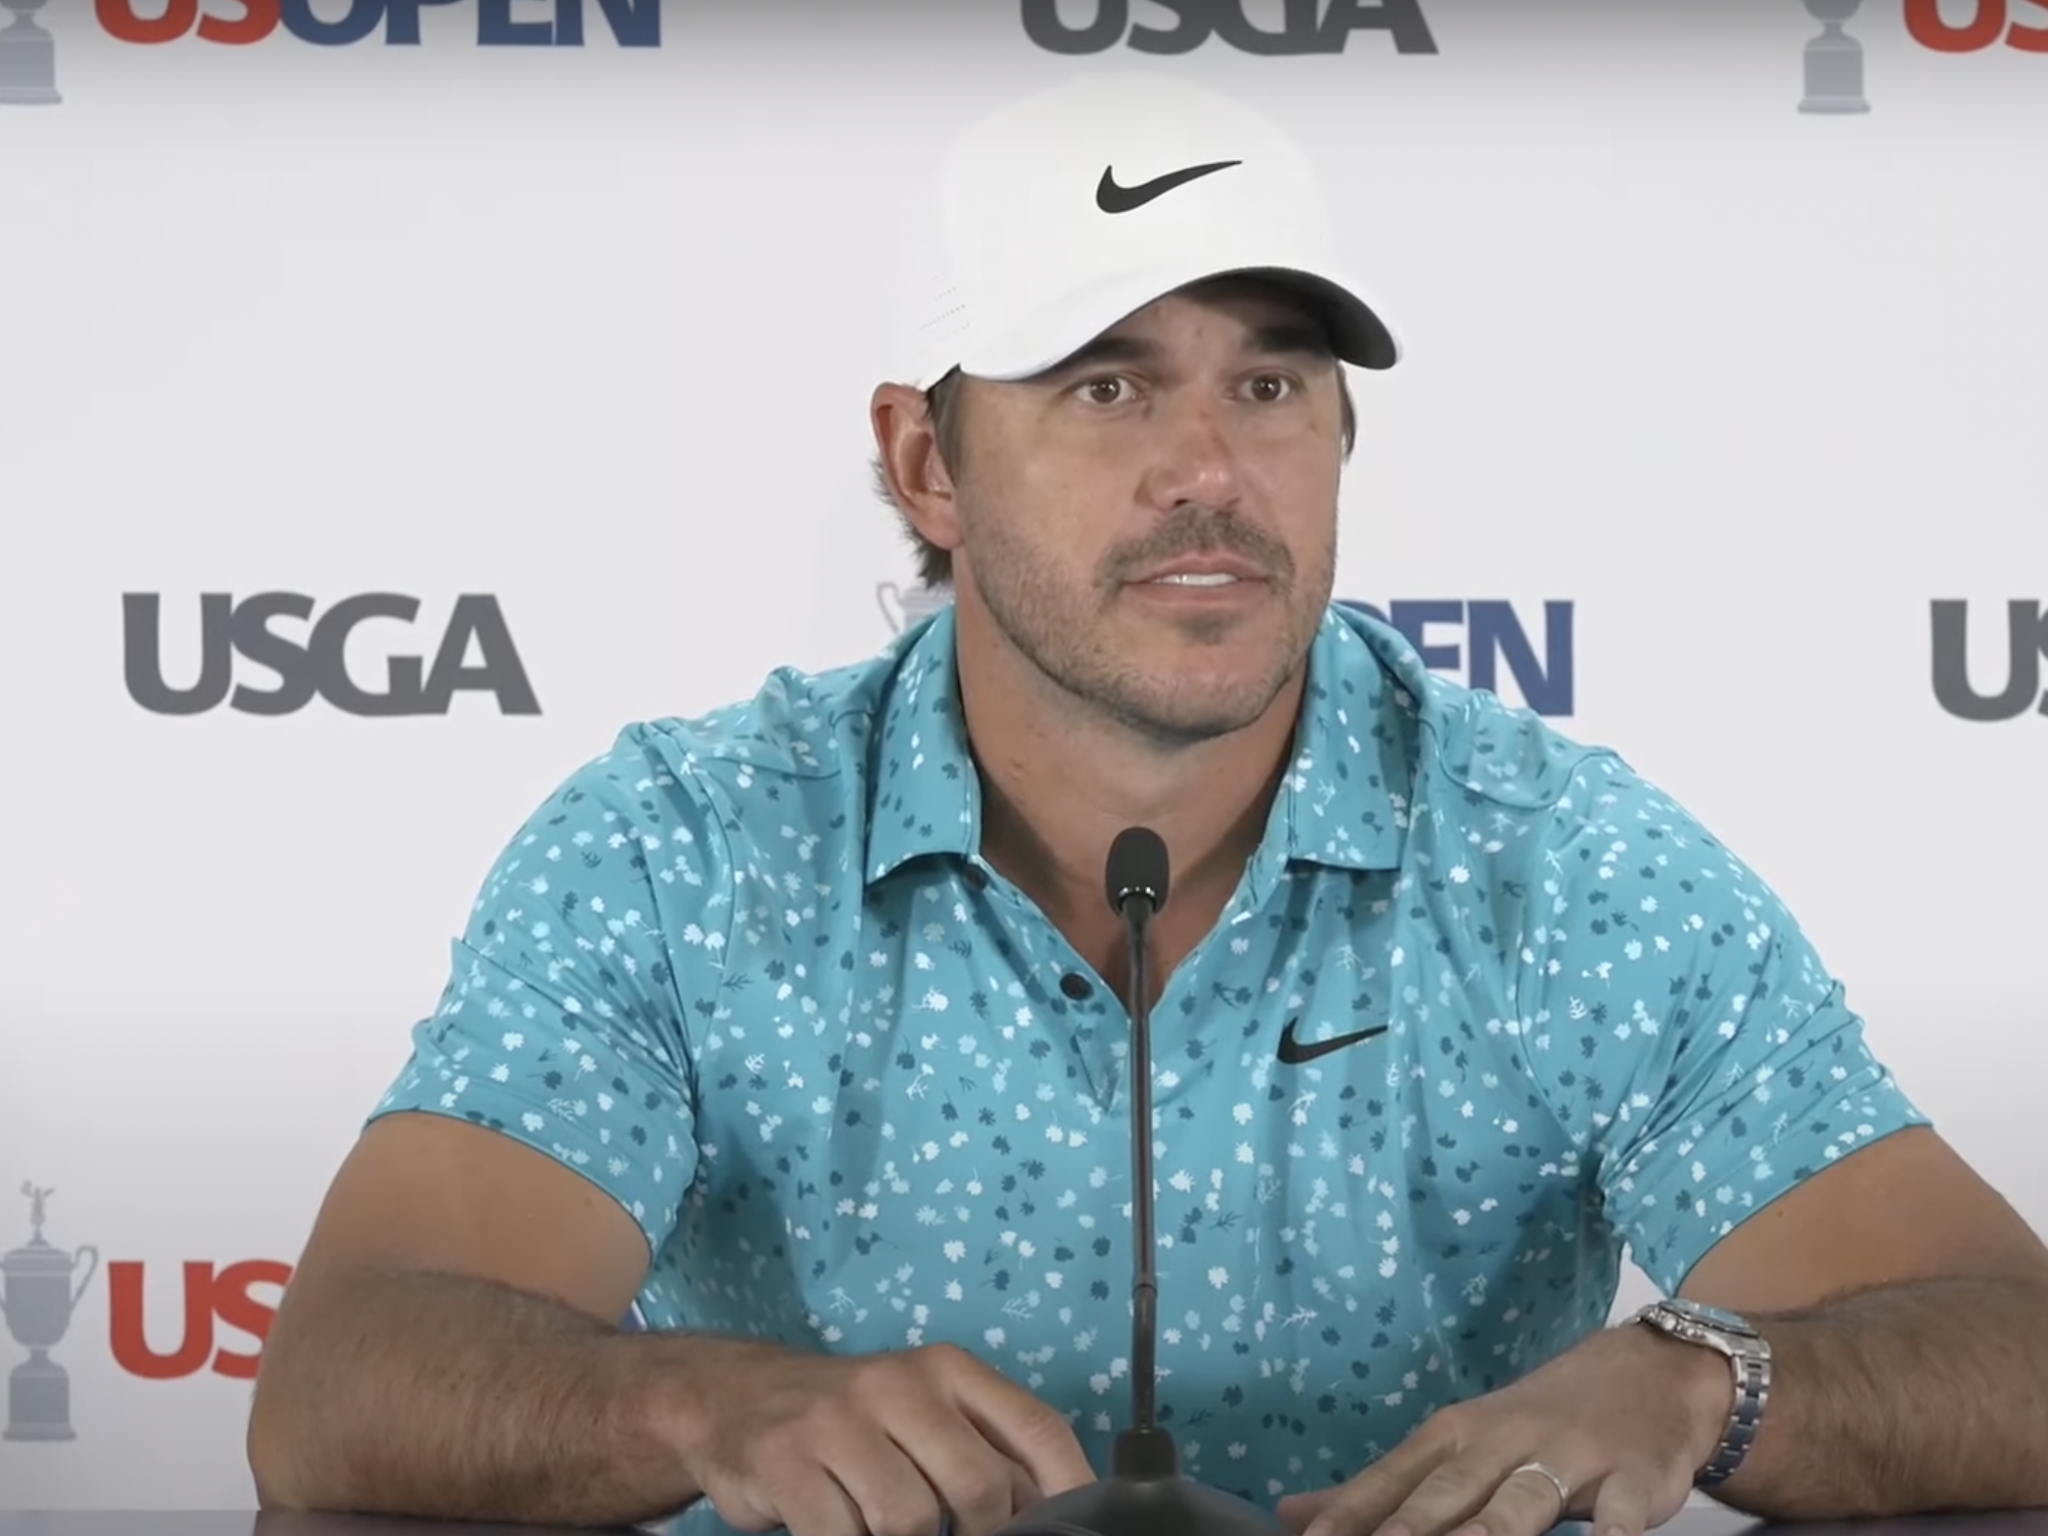 Everyone was b*****g and complaining – Brooks Koepka explains the chaos he thrives on at majors